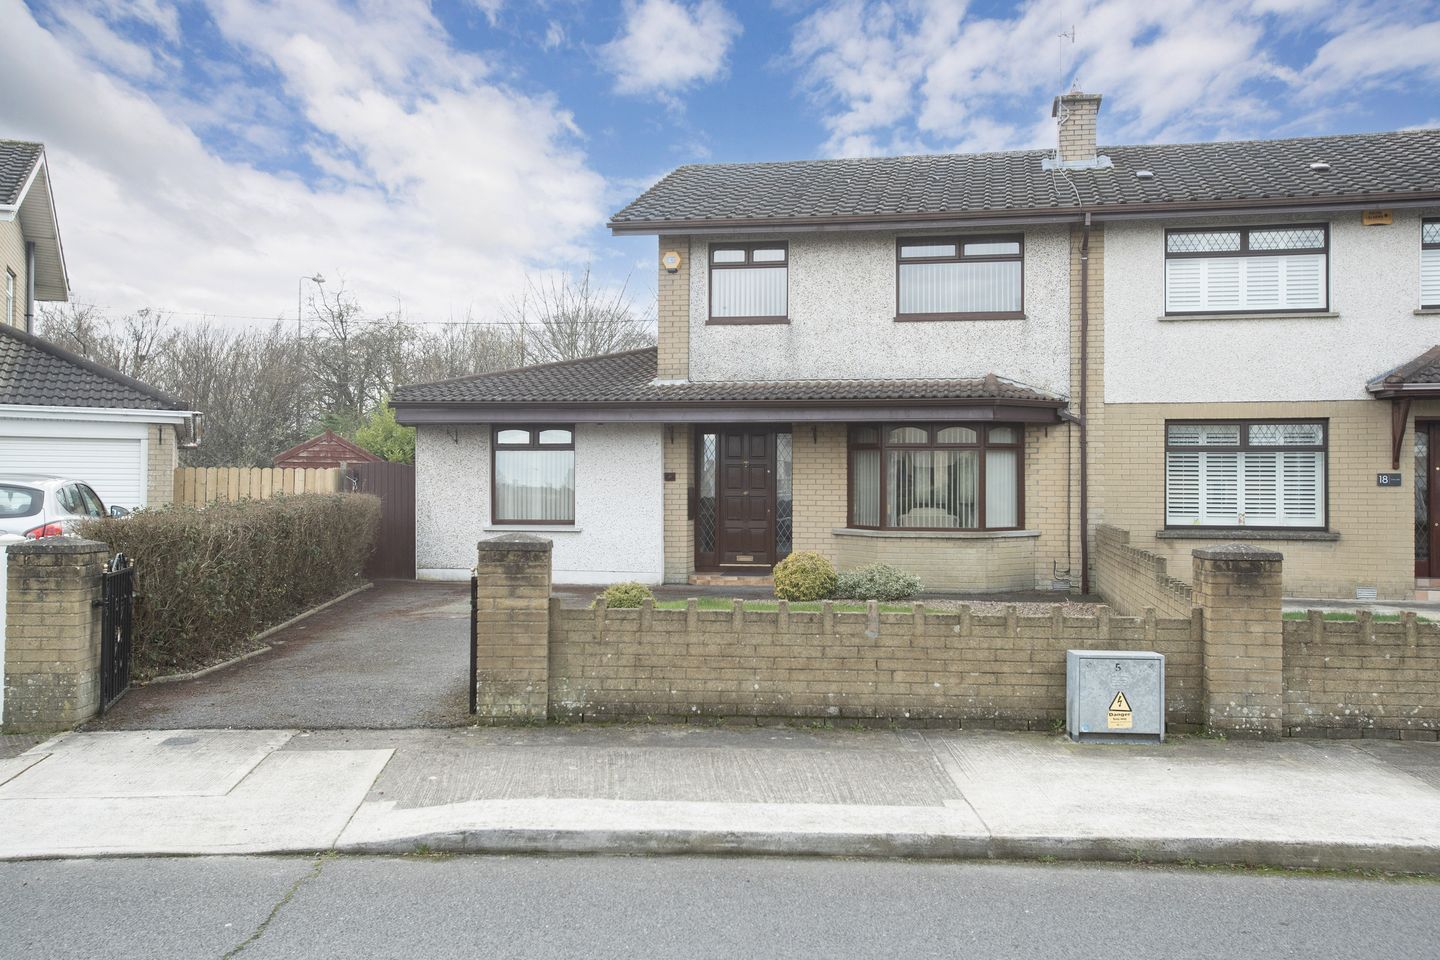 17 Cherryvale, Bay Estate, Dundalk, Co. Louth